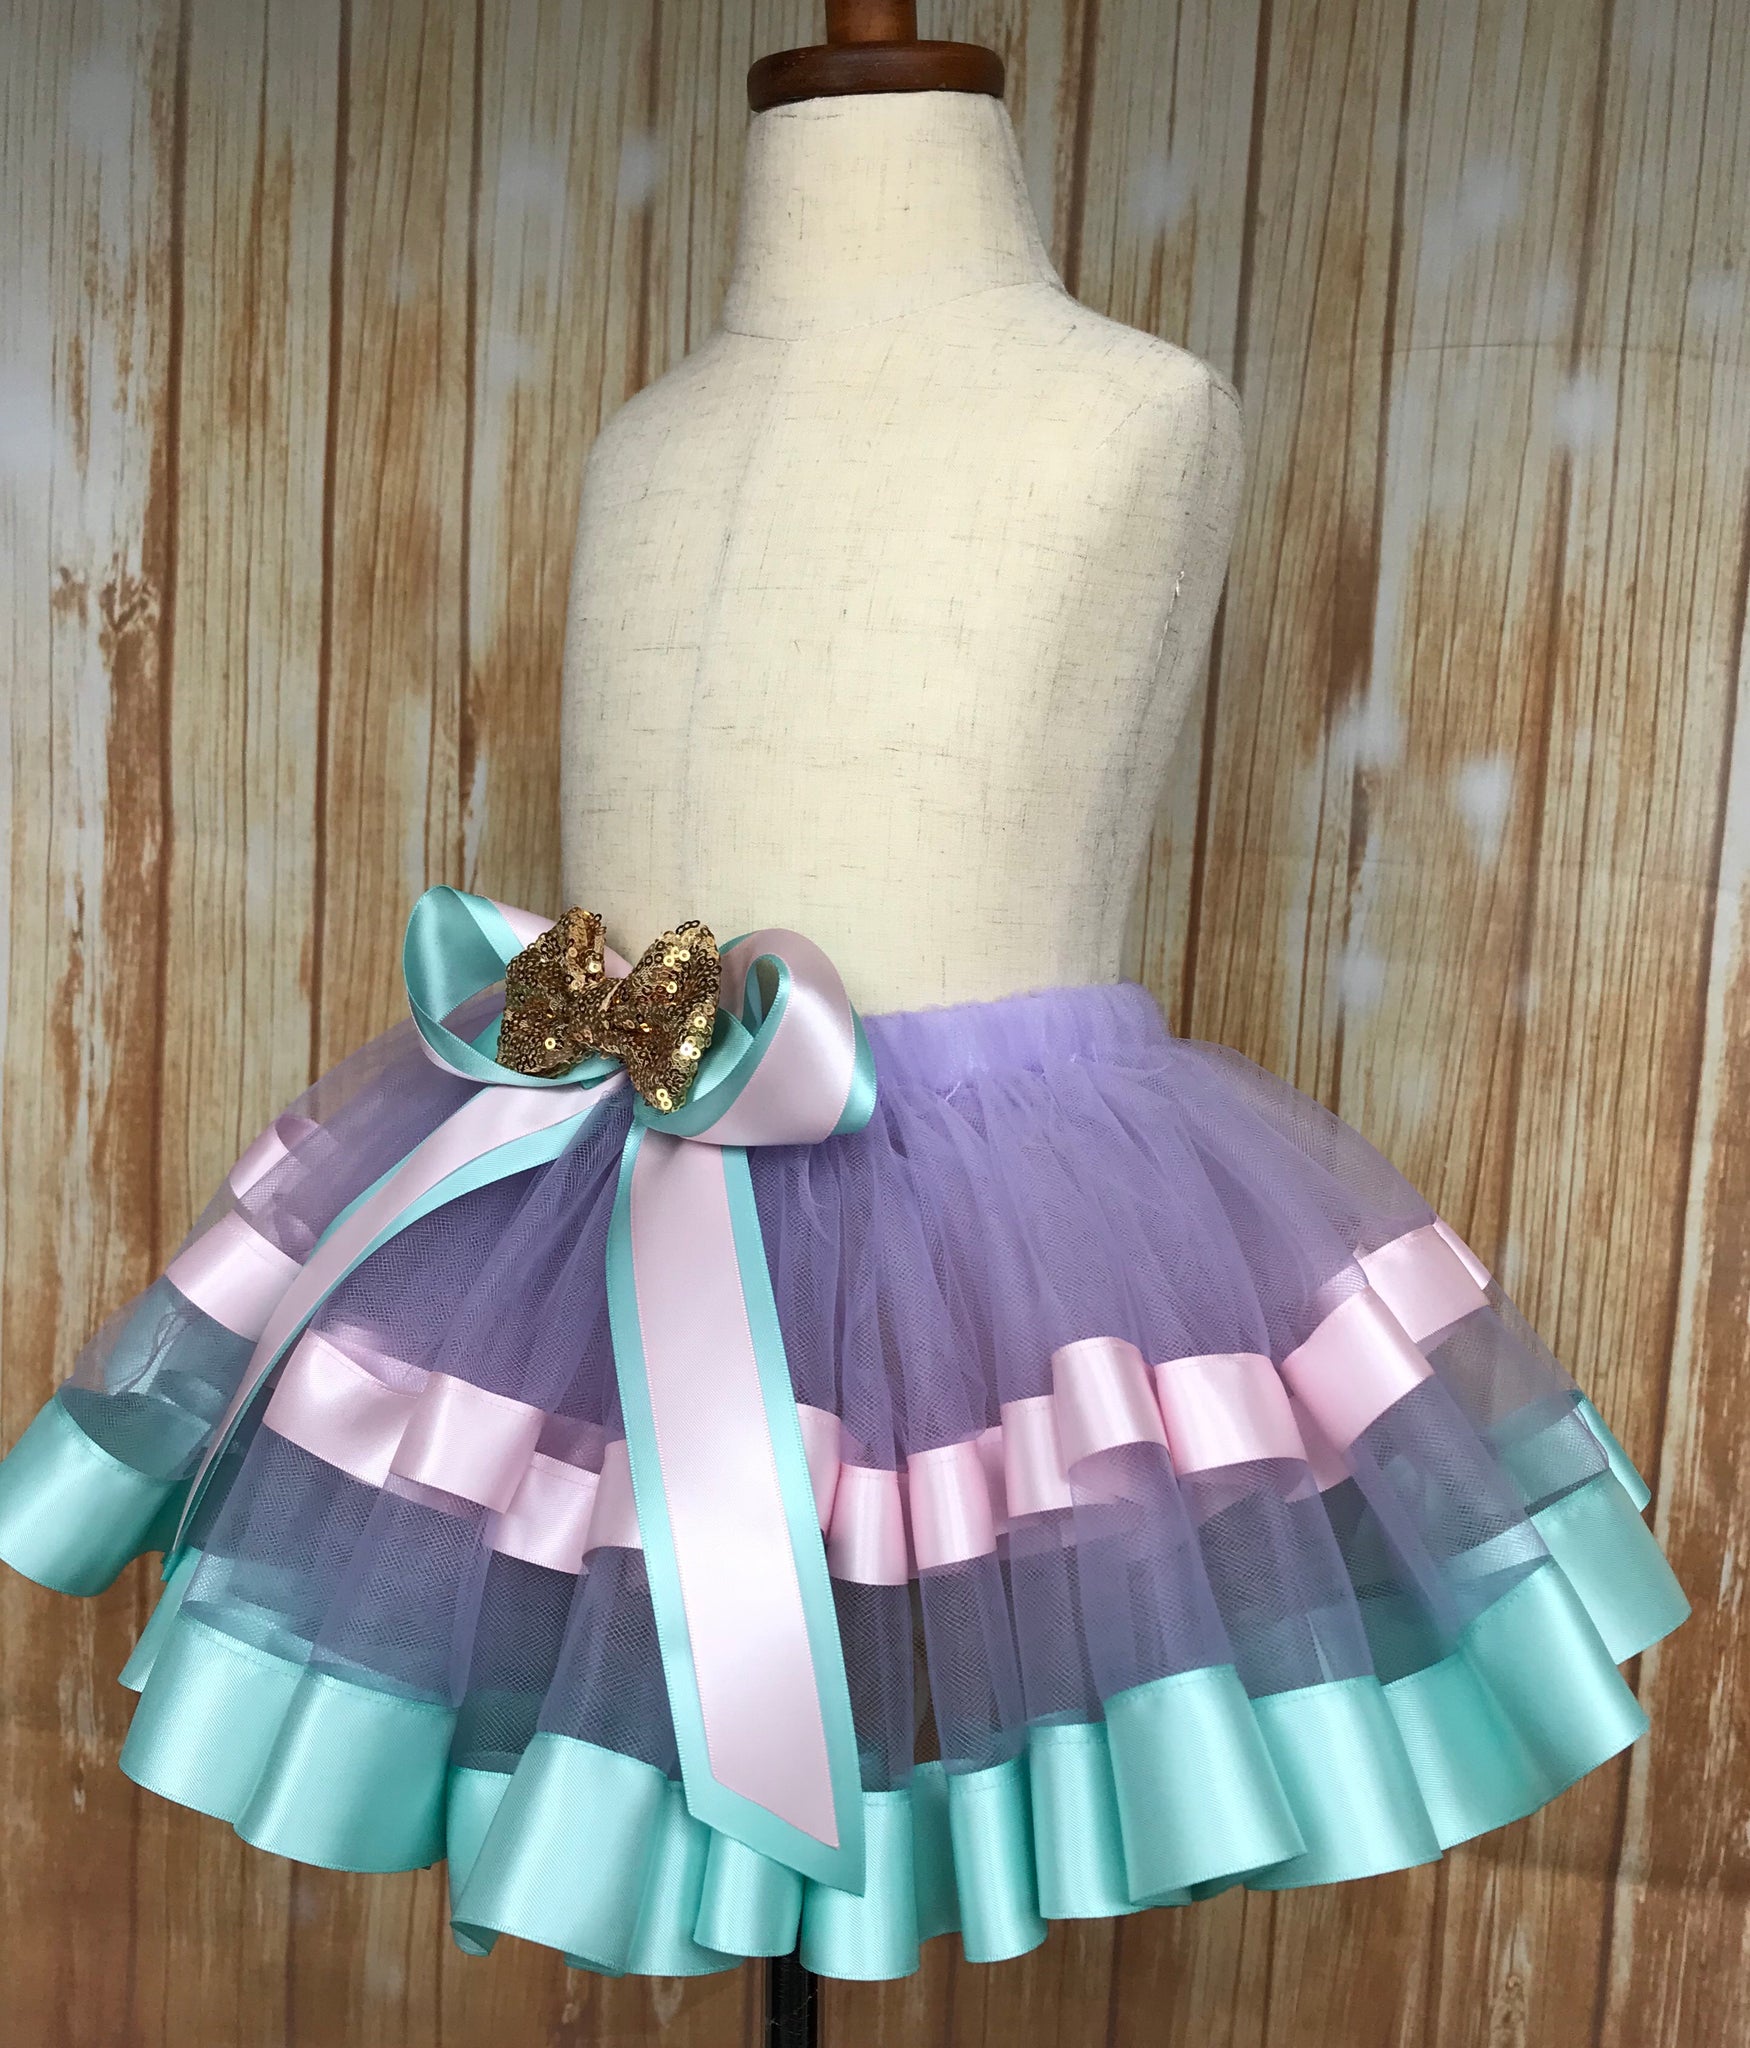 New Pink Tulle Ribbon - Tulle Ribbon - Tulle